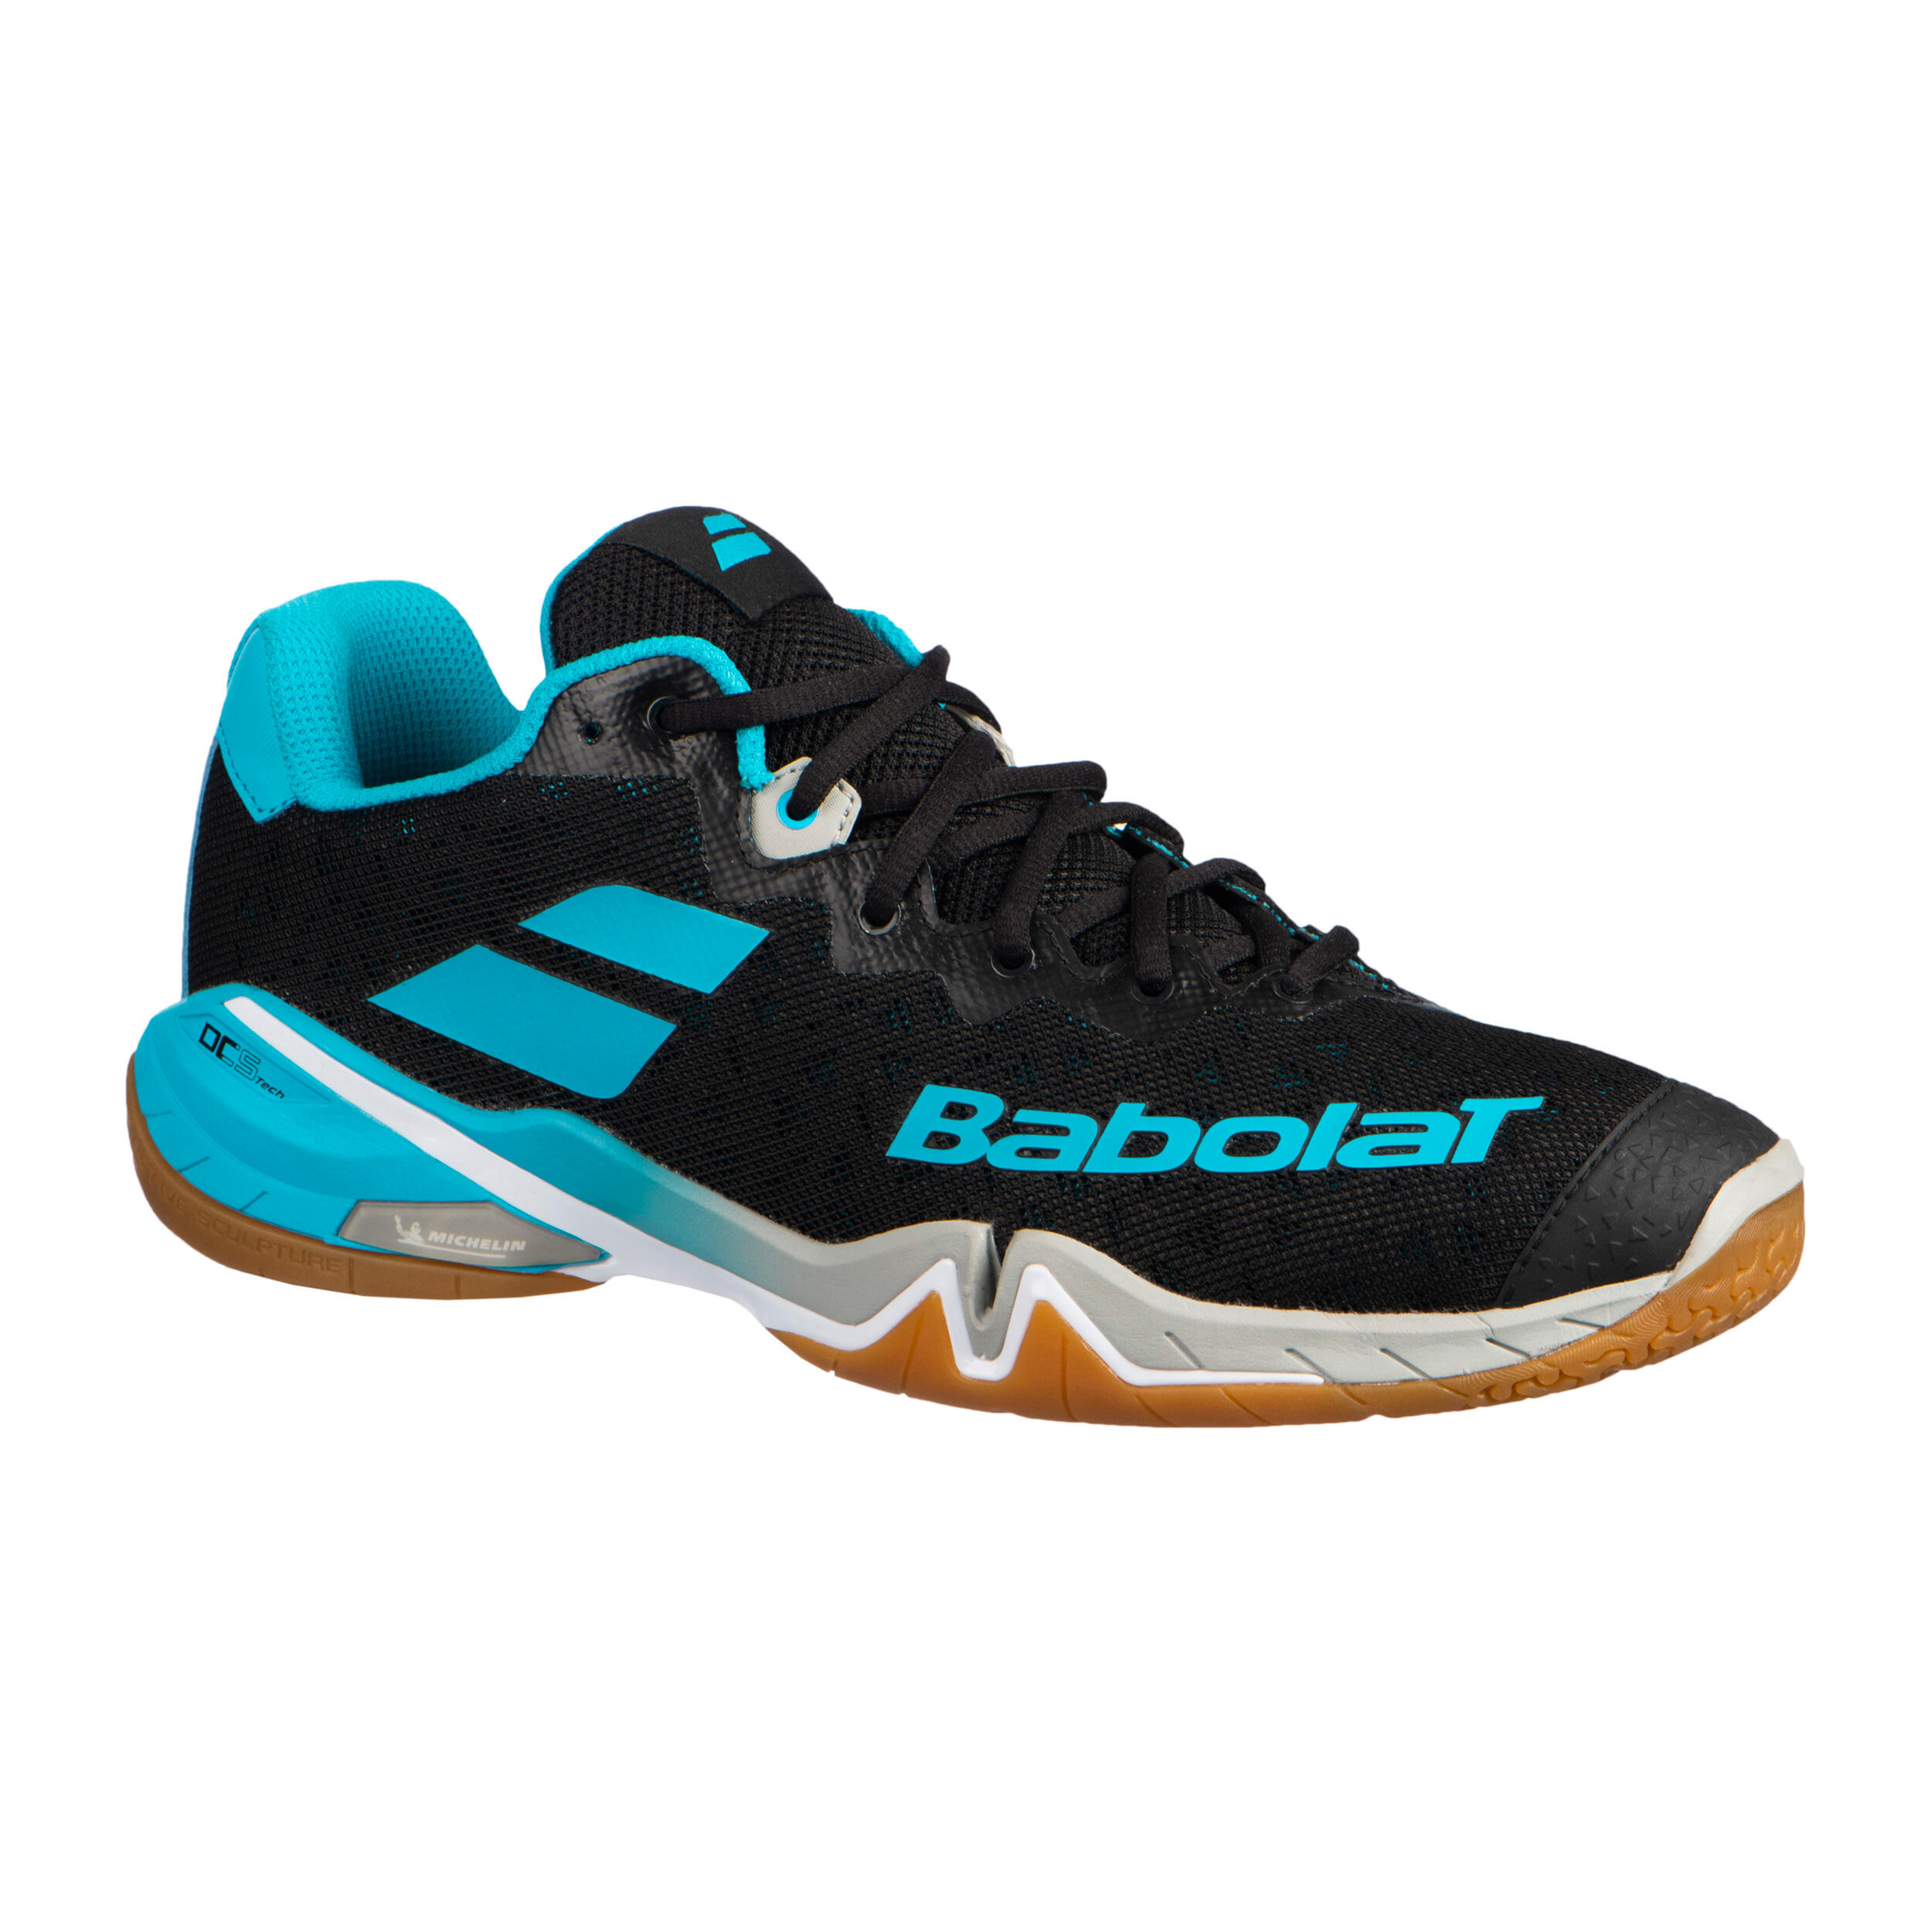 Badminton, Squash And Indoor Sports Shoes Shadow Tour - Black / Blue